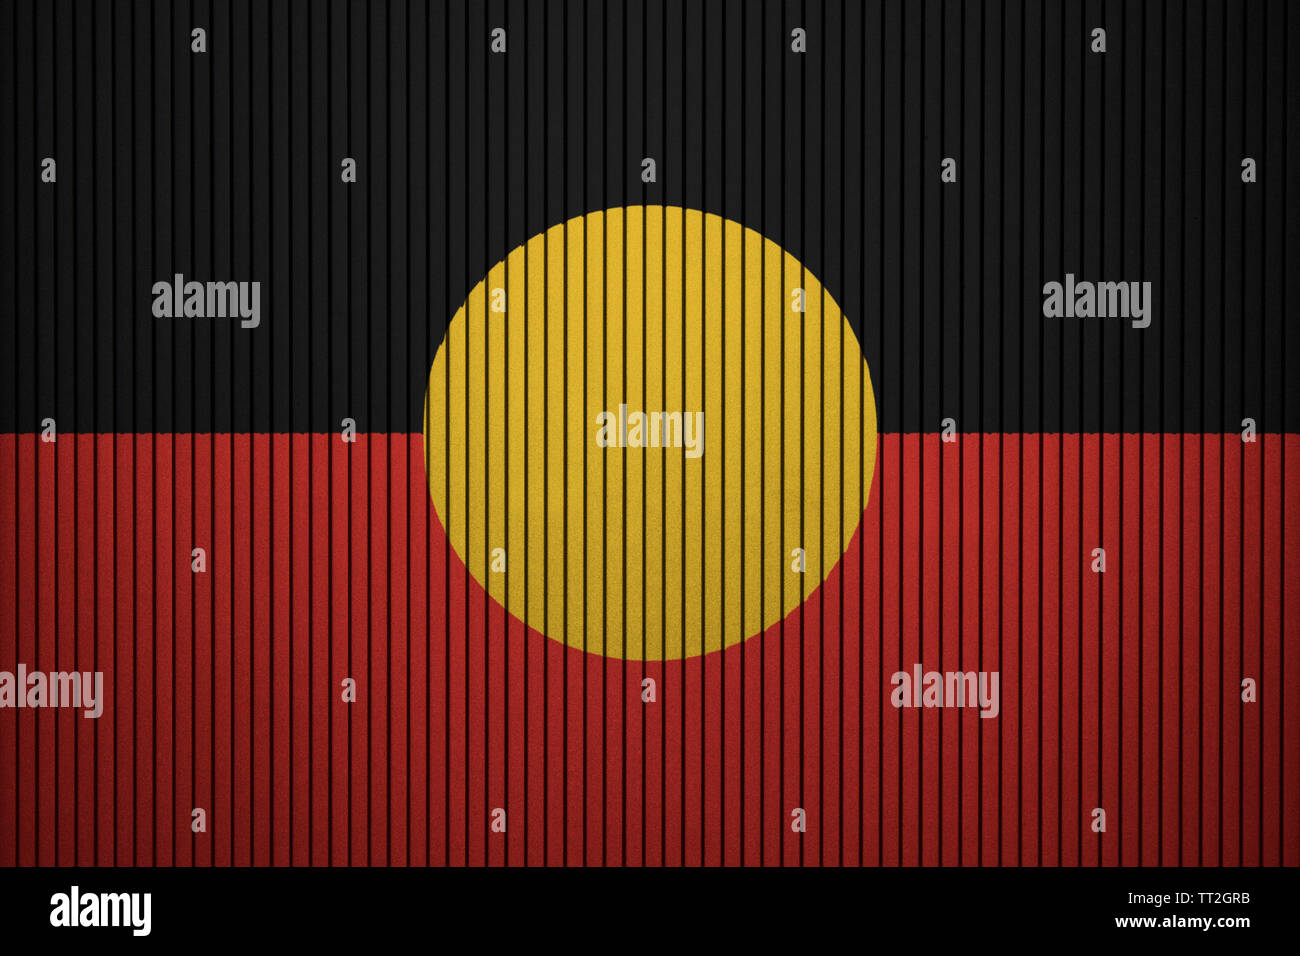 Australian Aboriginal flag painted on the cracked grunge concrete wall Stock Photo